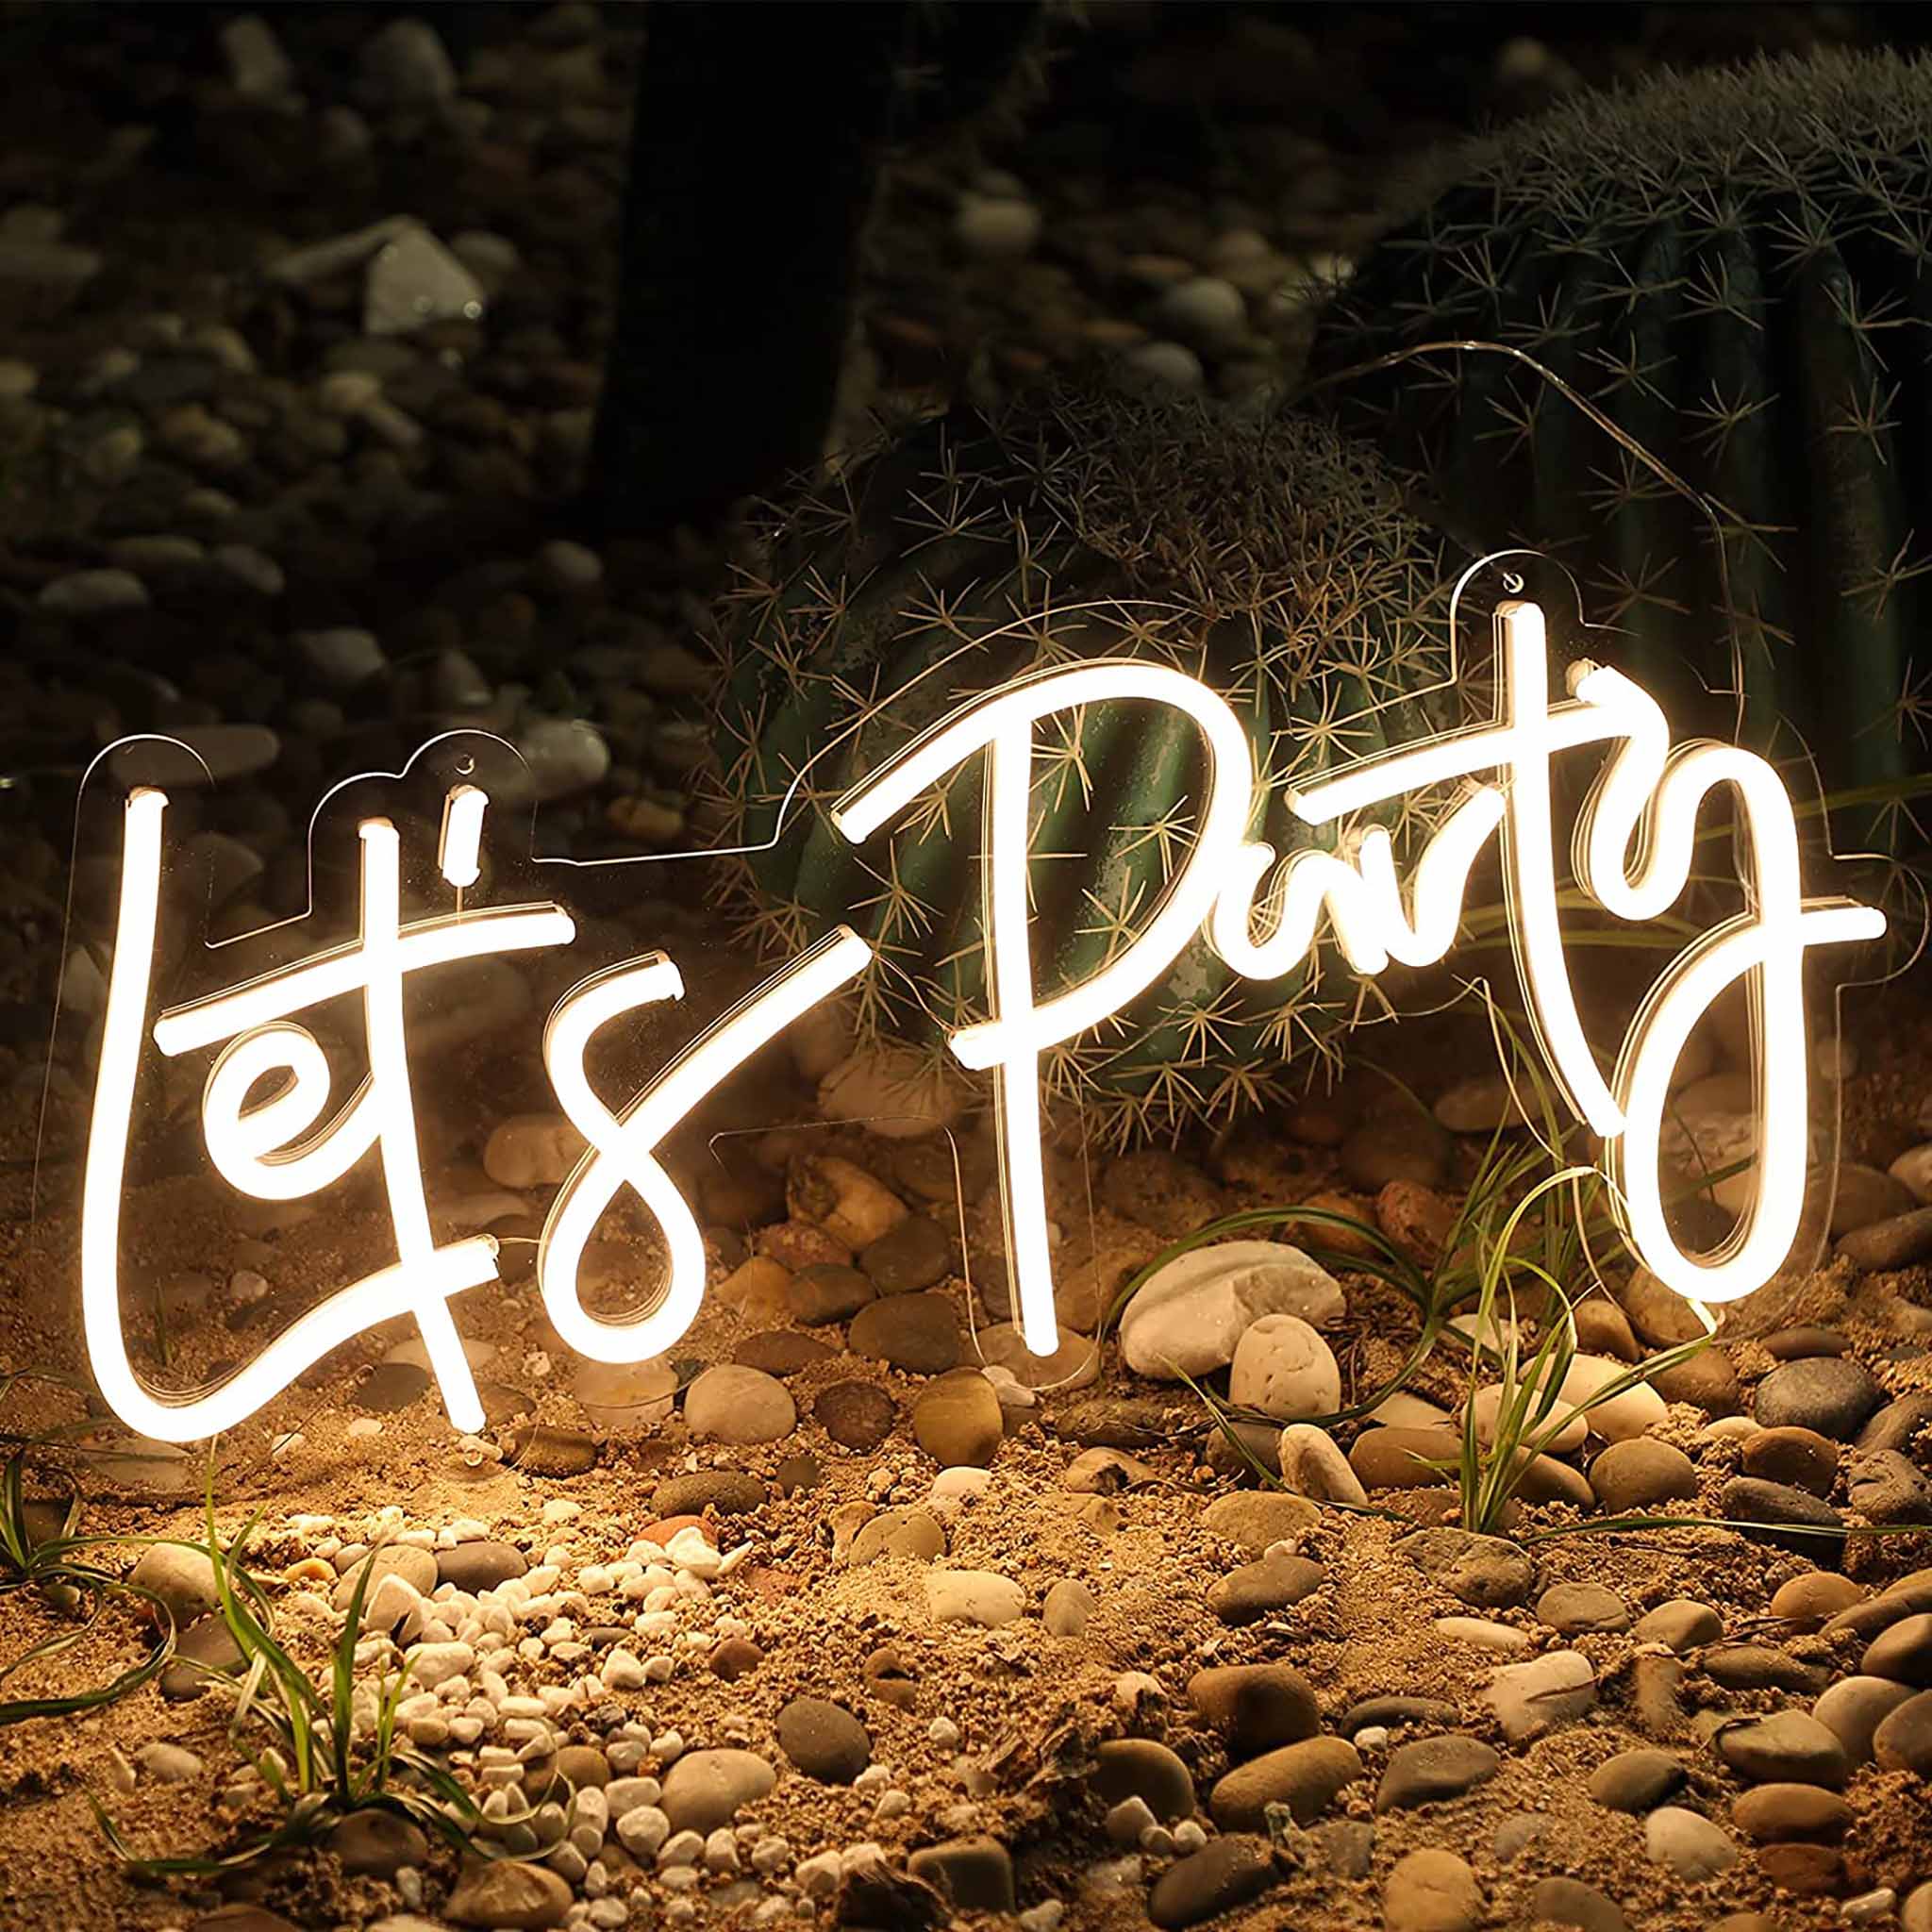 Let's Party LED Neon Sign Schriftzug